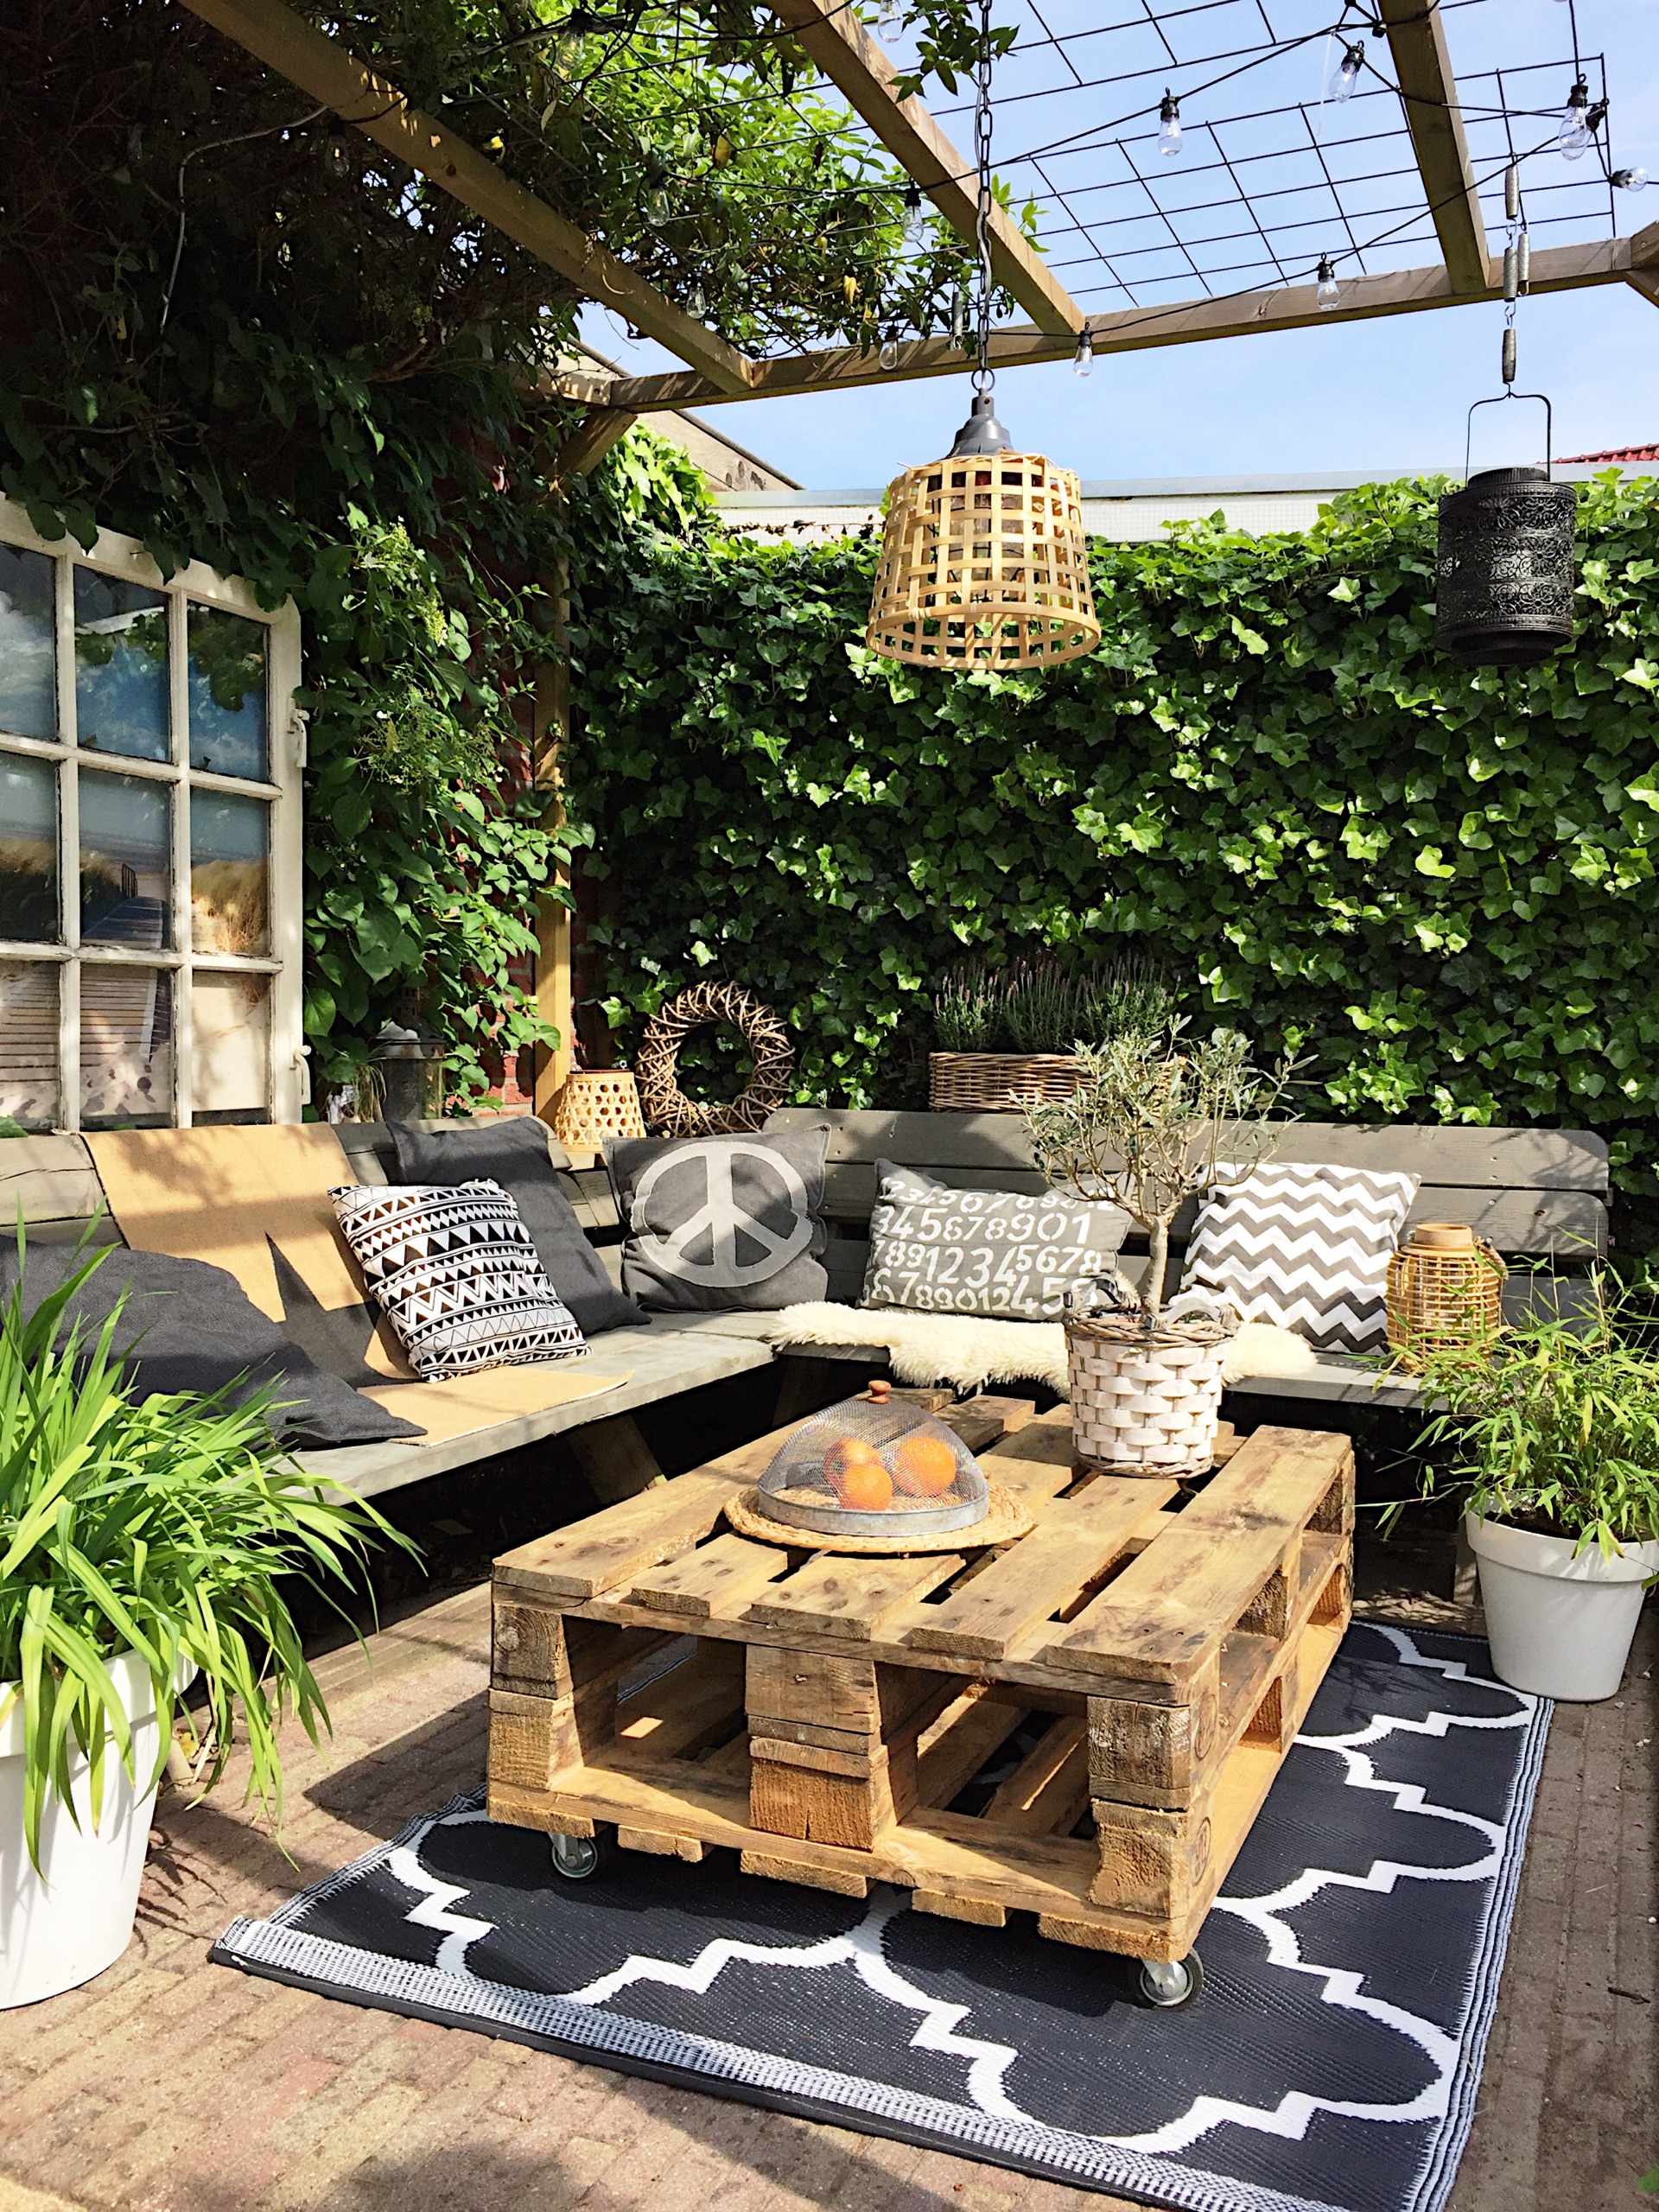 Create Yours Outdoor Dining Area For The Ultimate Summer Entertaining